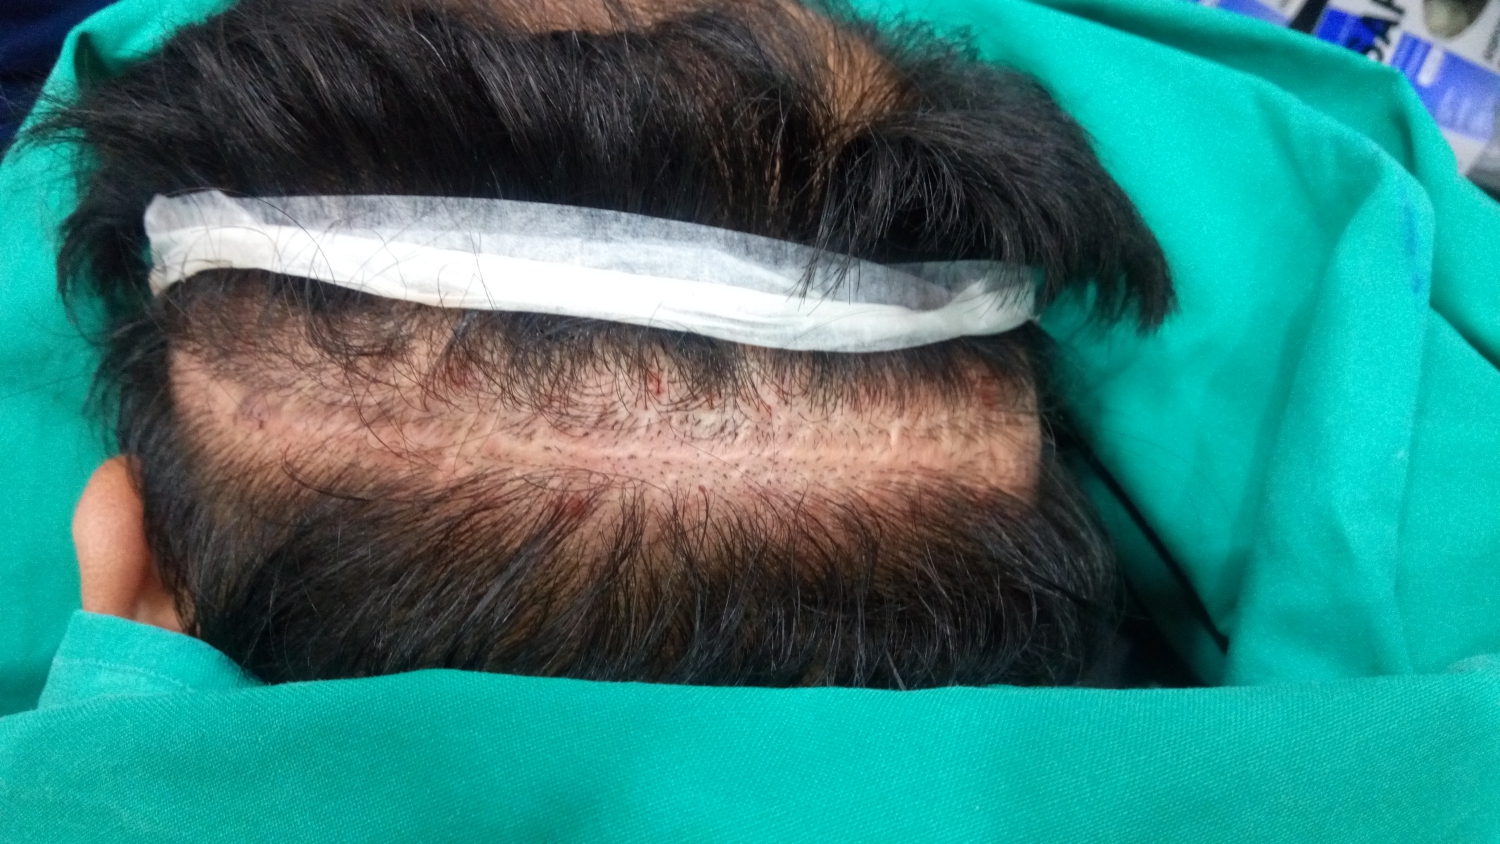 Parietal hair transplant with a wide range of hair loss...Scalp tattooing also helps